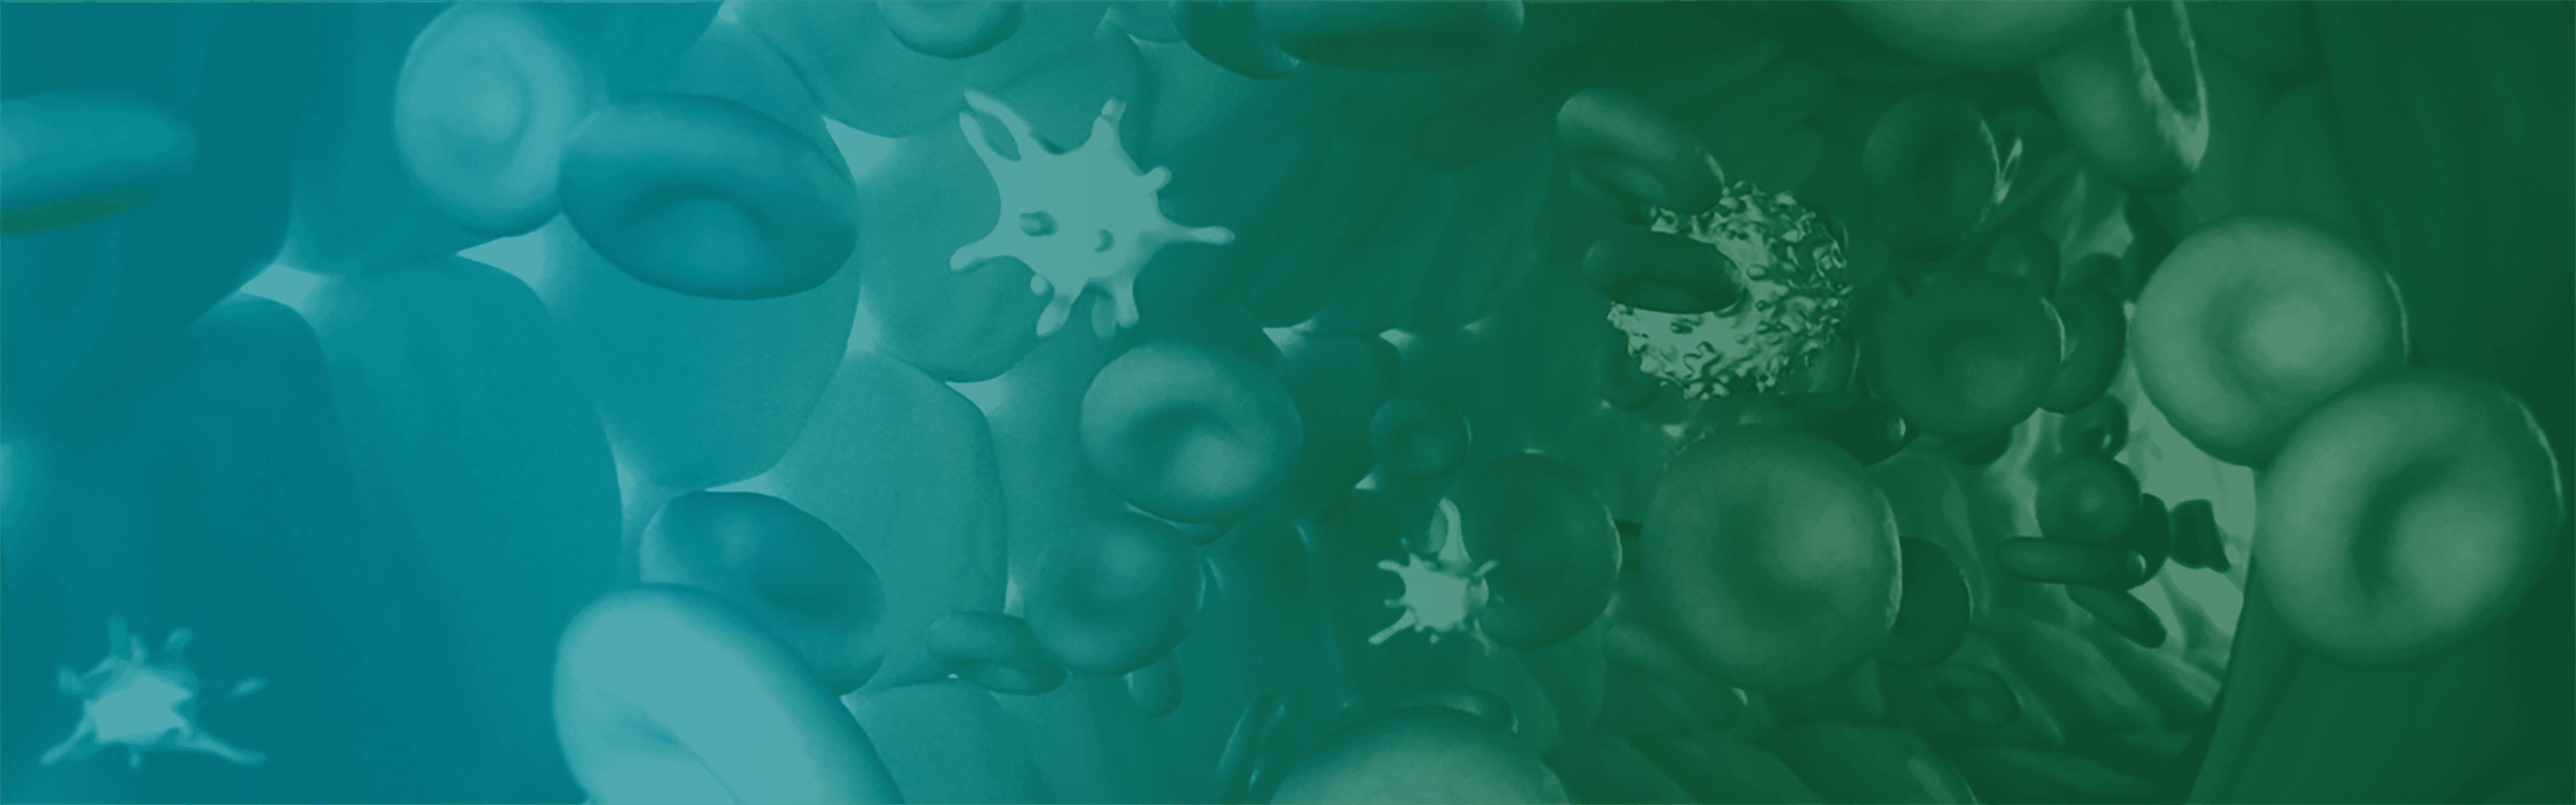 Green blood cell background